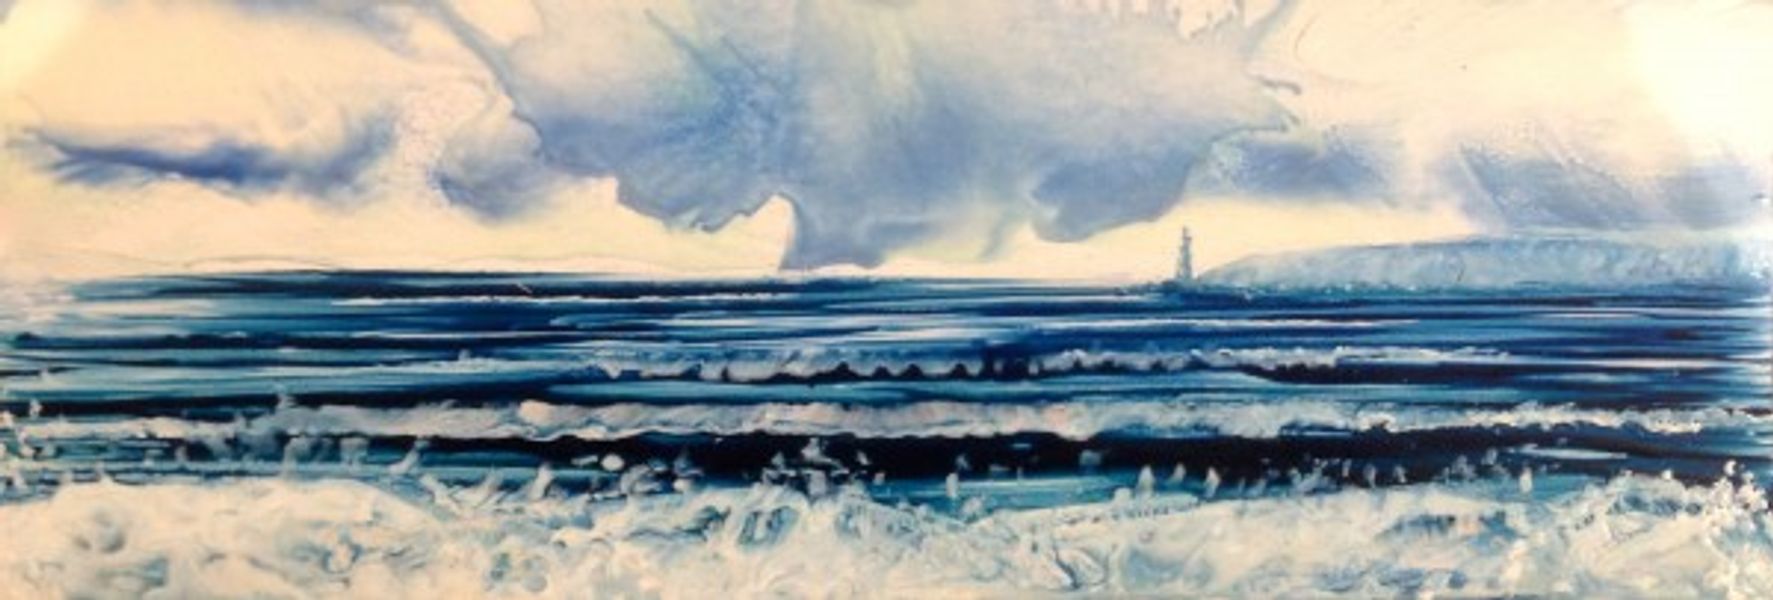 seascape painted by Phil Madley in encaustic wax